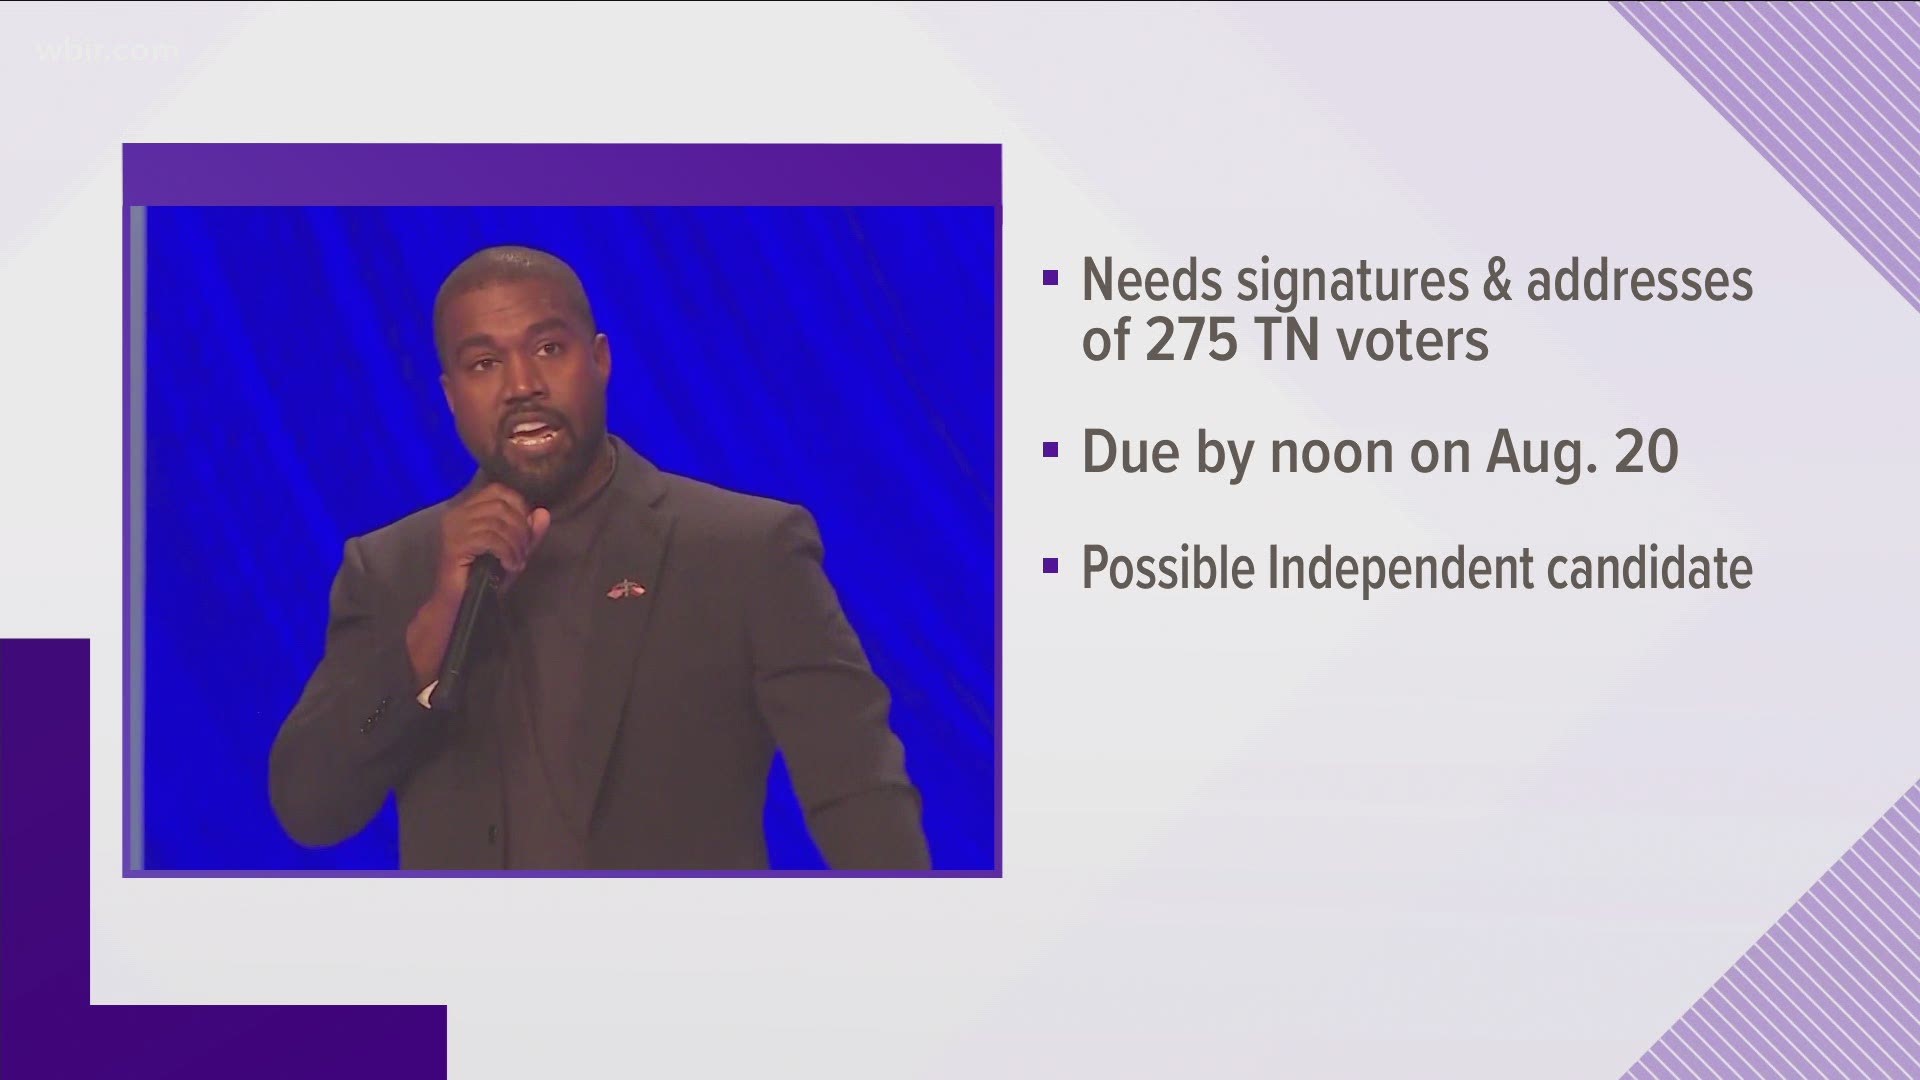 A representative for Kanye West has picked up papers that would allow the rapper to be on the TN presidential ballot in November.